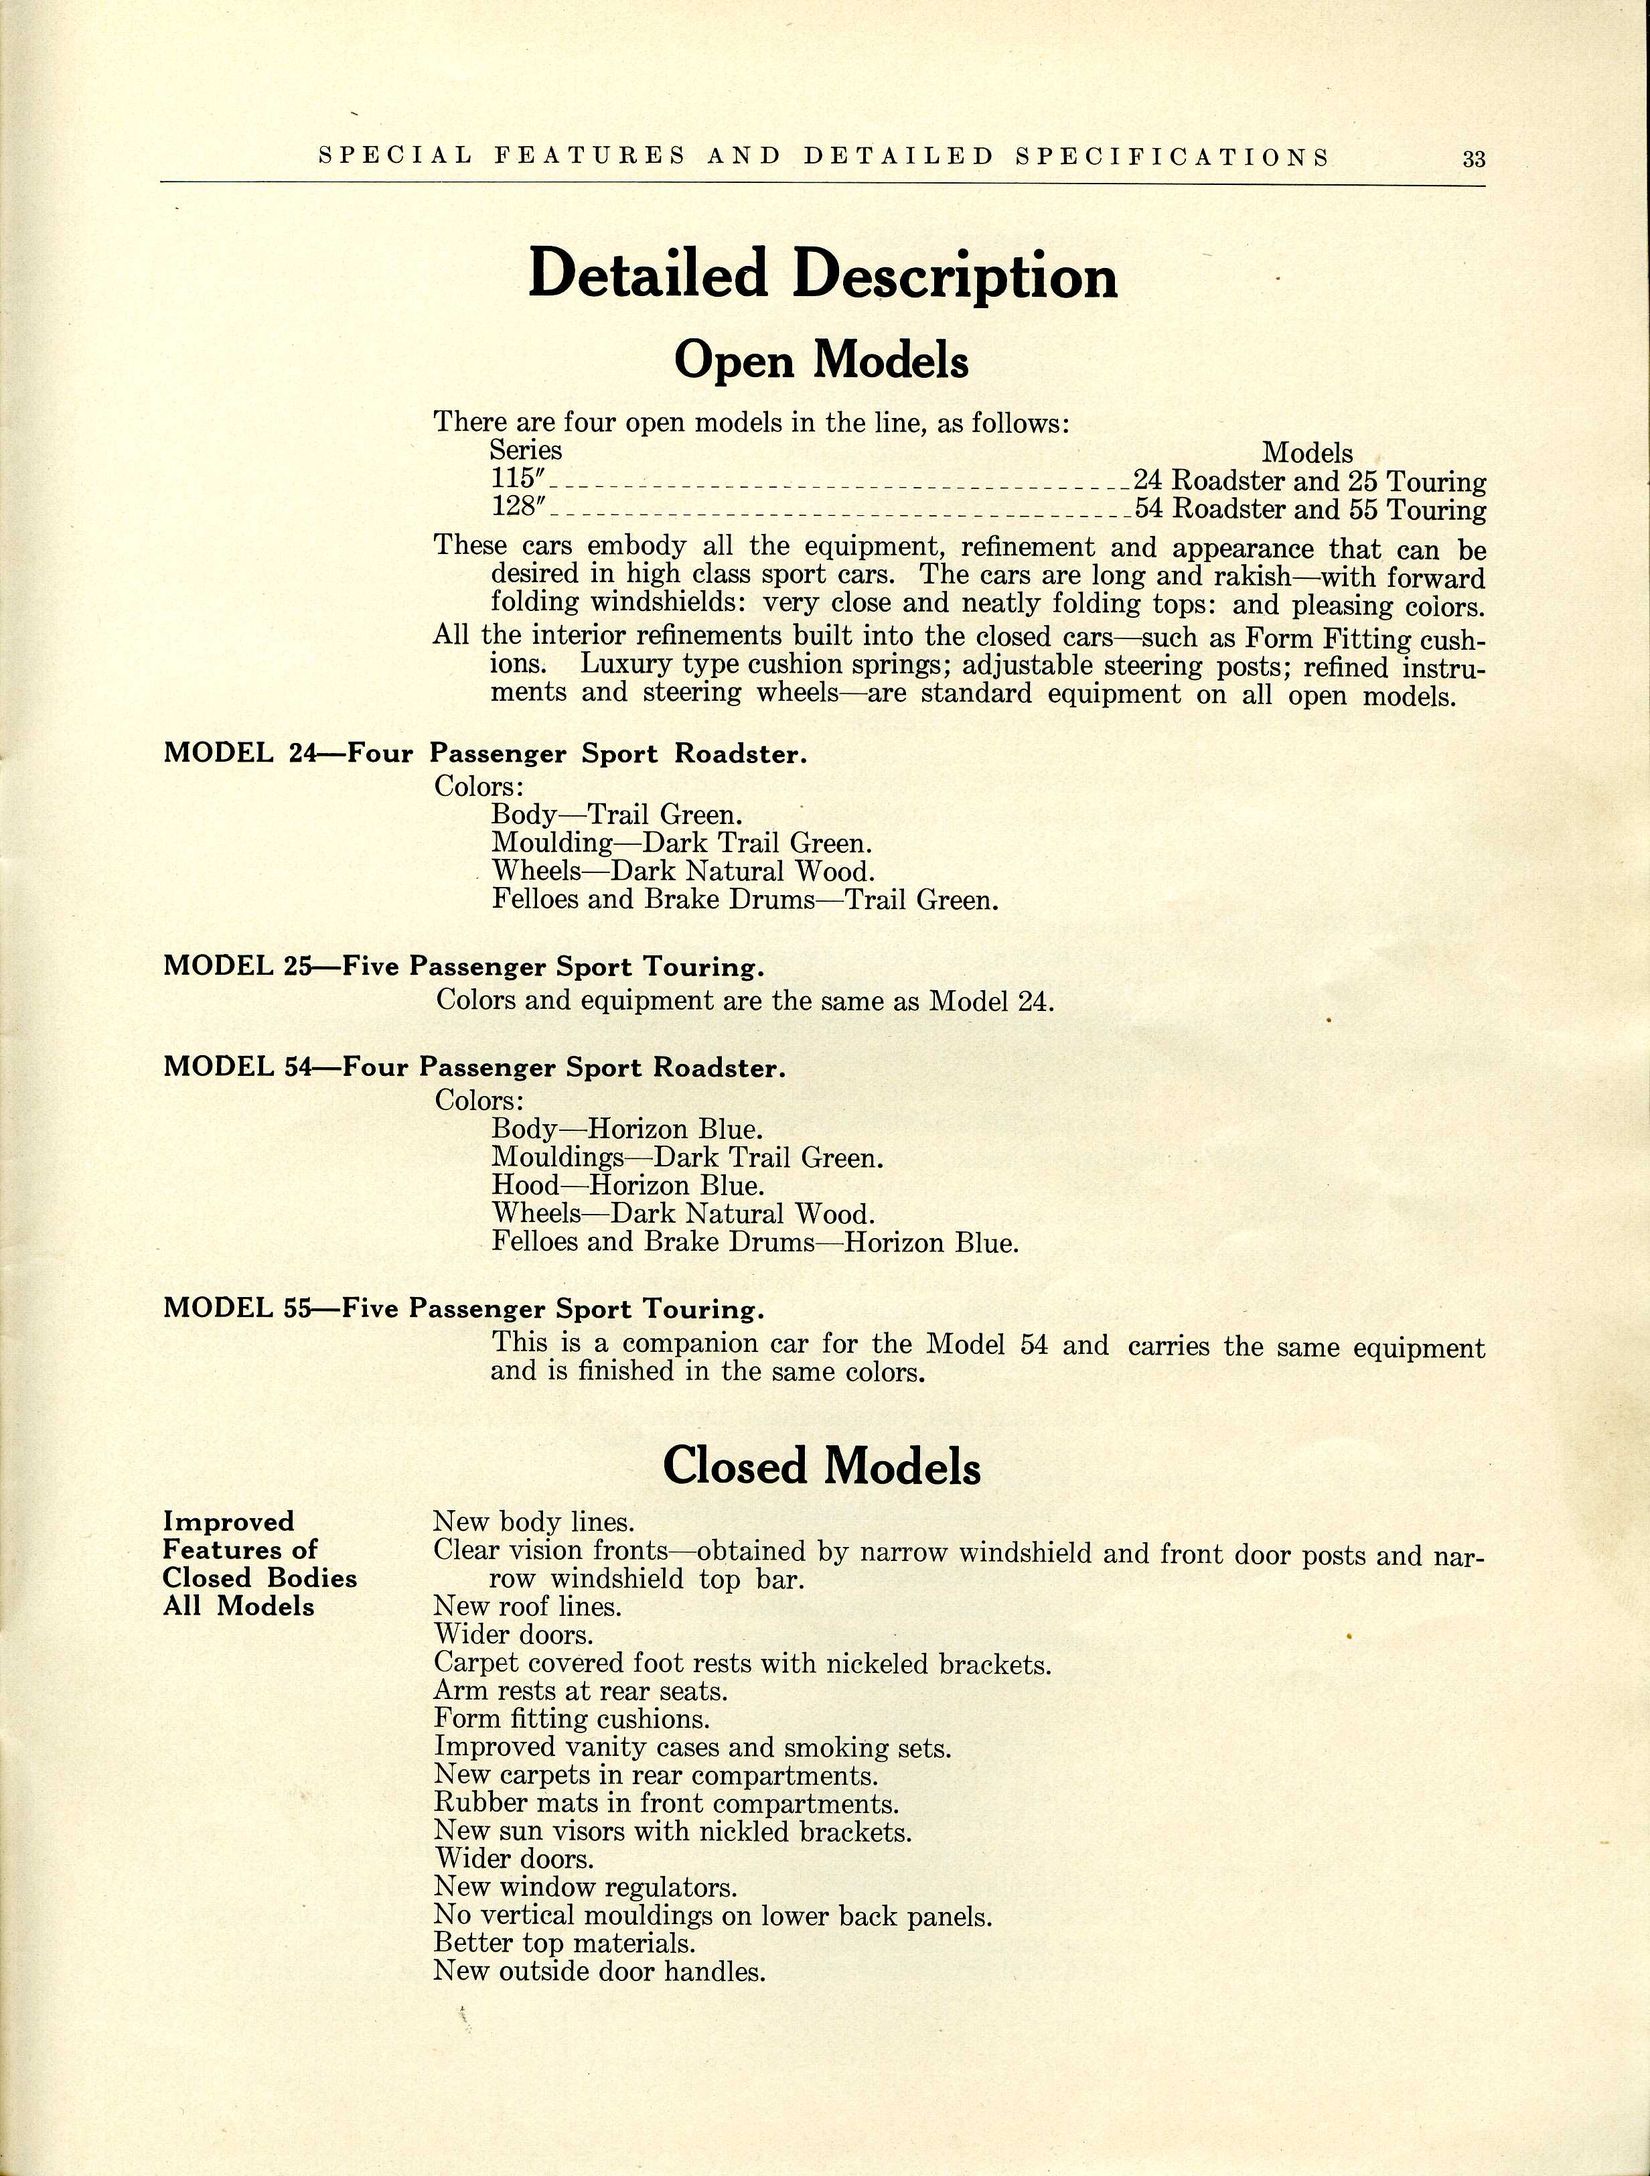 1928 Buick Special Features and  Specs-33